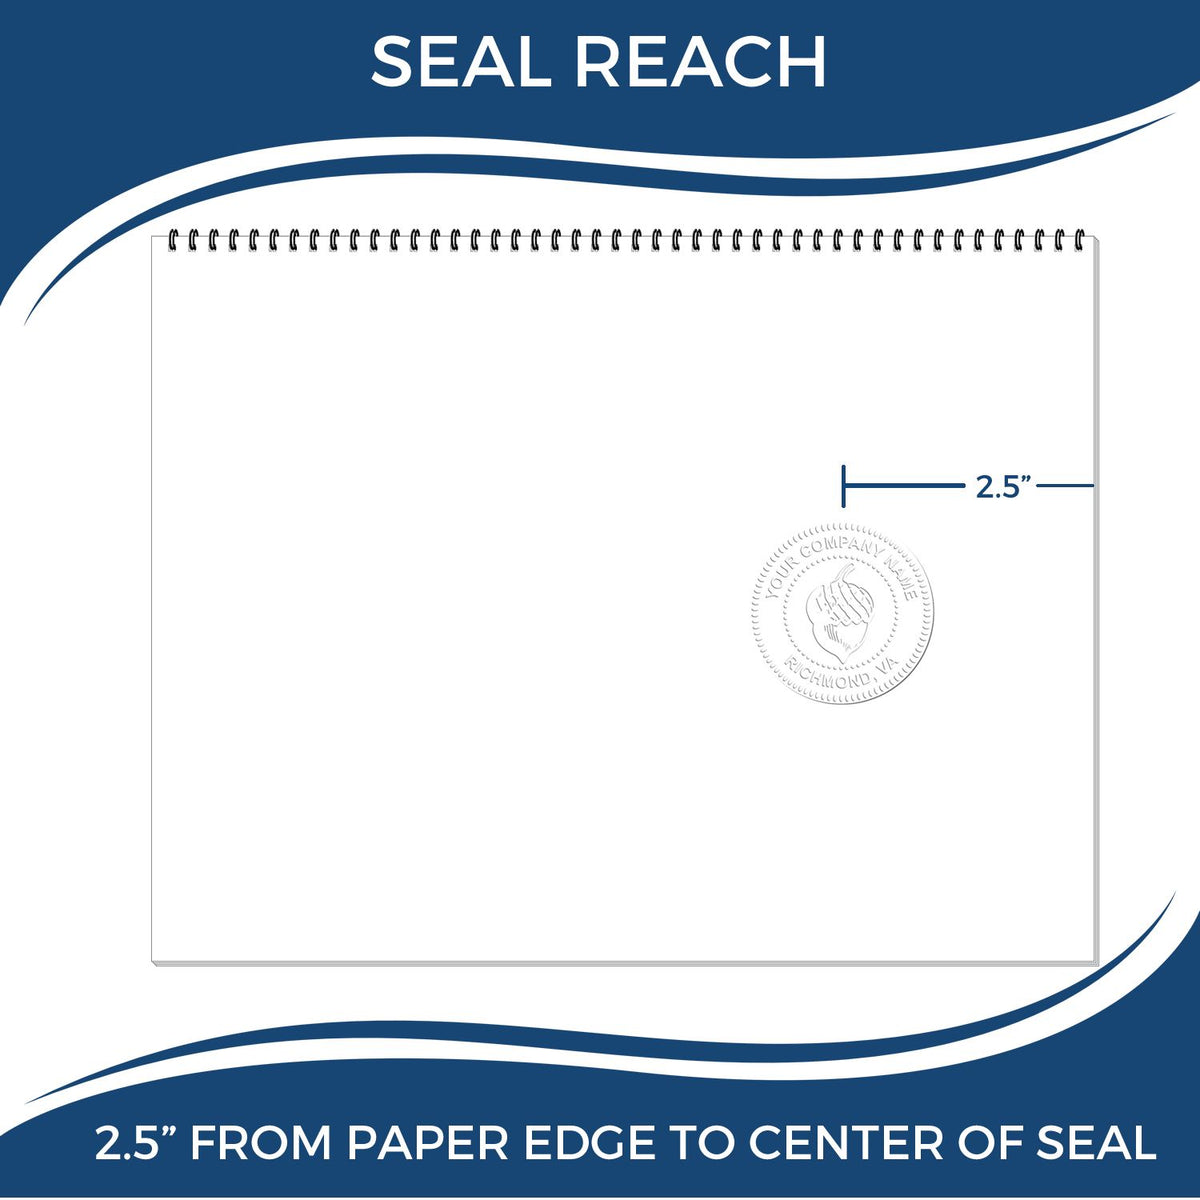 An infographic showing the seal reach which is represented by a ruler and a miniature seal image of the Long Reach Michigan Land Surveyor Seal